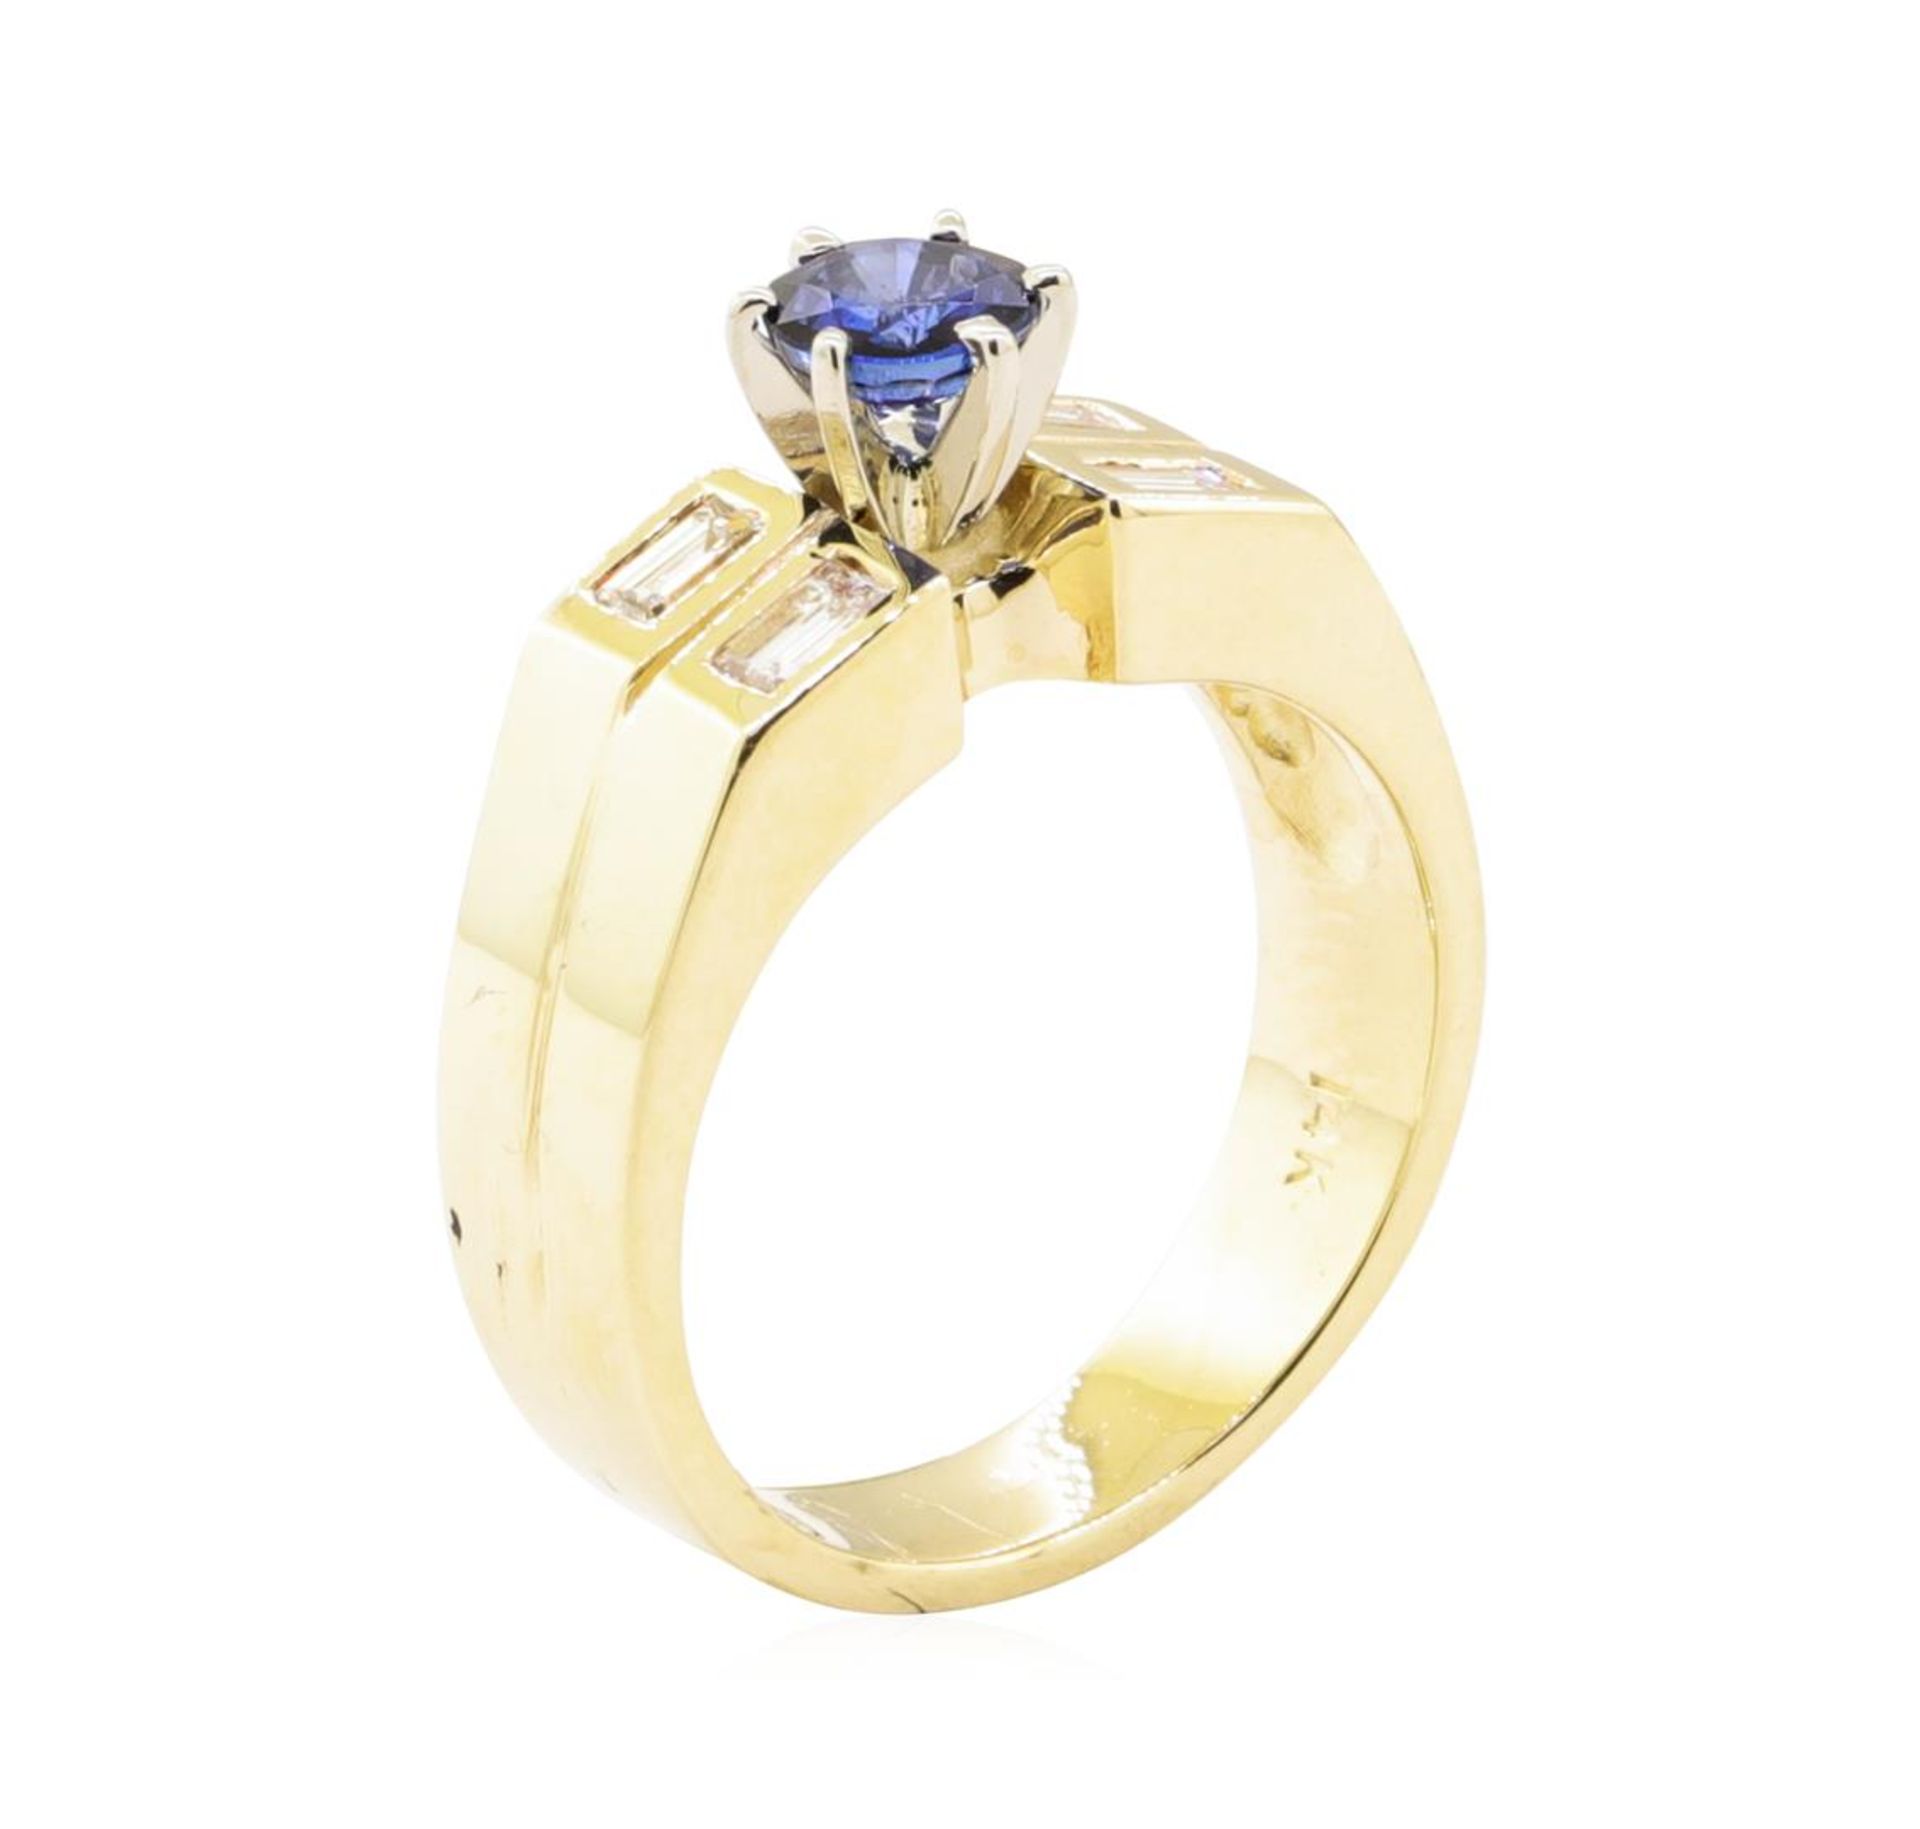 1.02ctw Blue Sapphire and Diamond Ring - 14KT Yellow Gold - Image 4 of 4